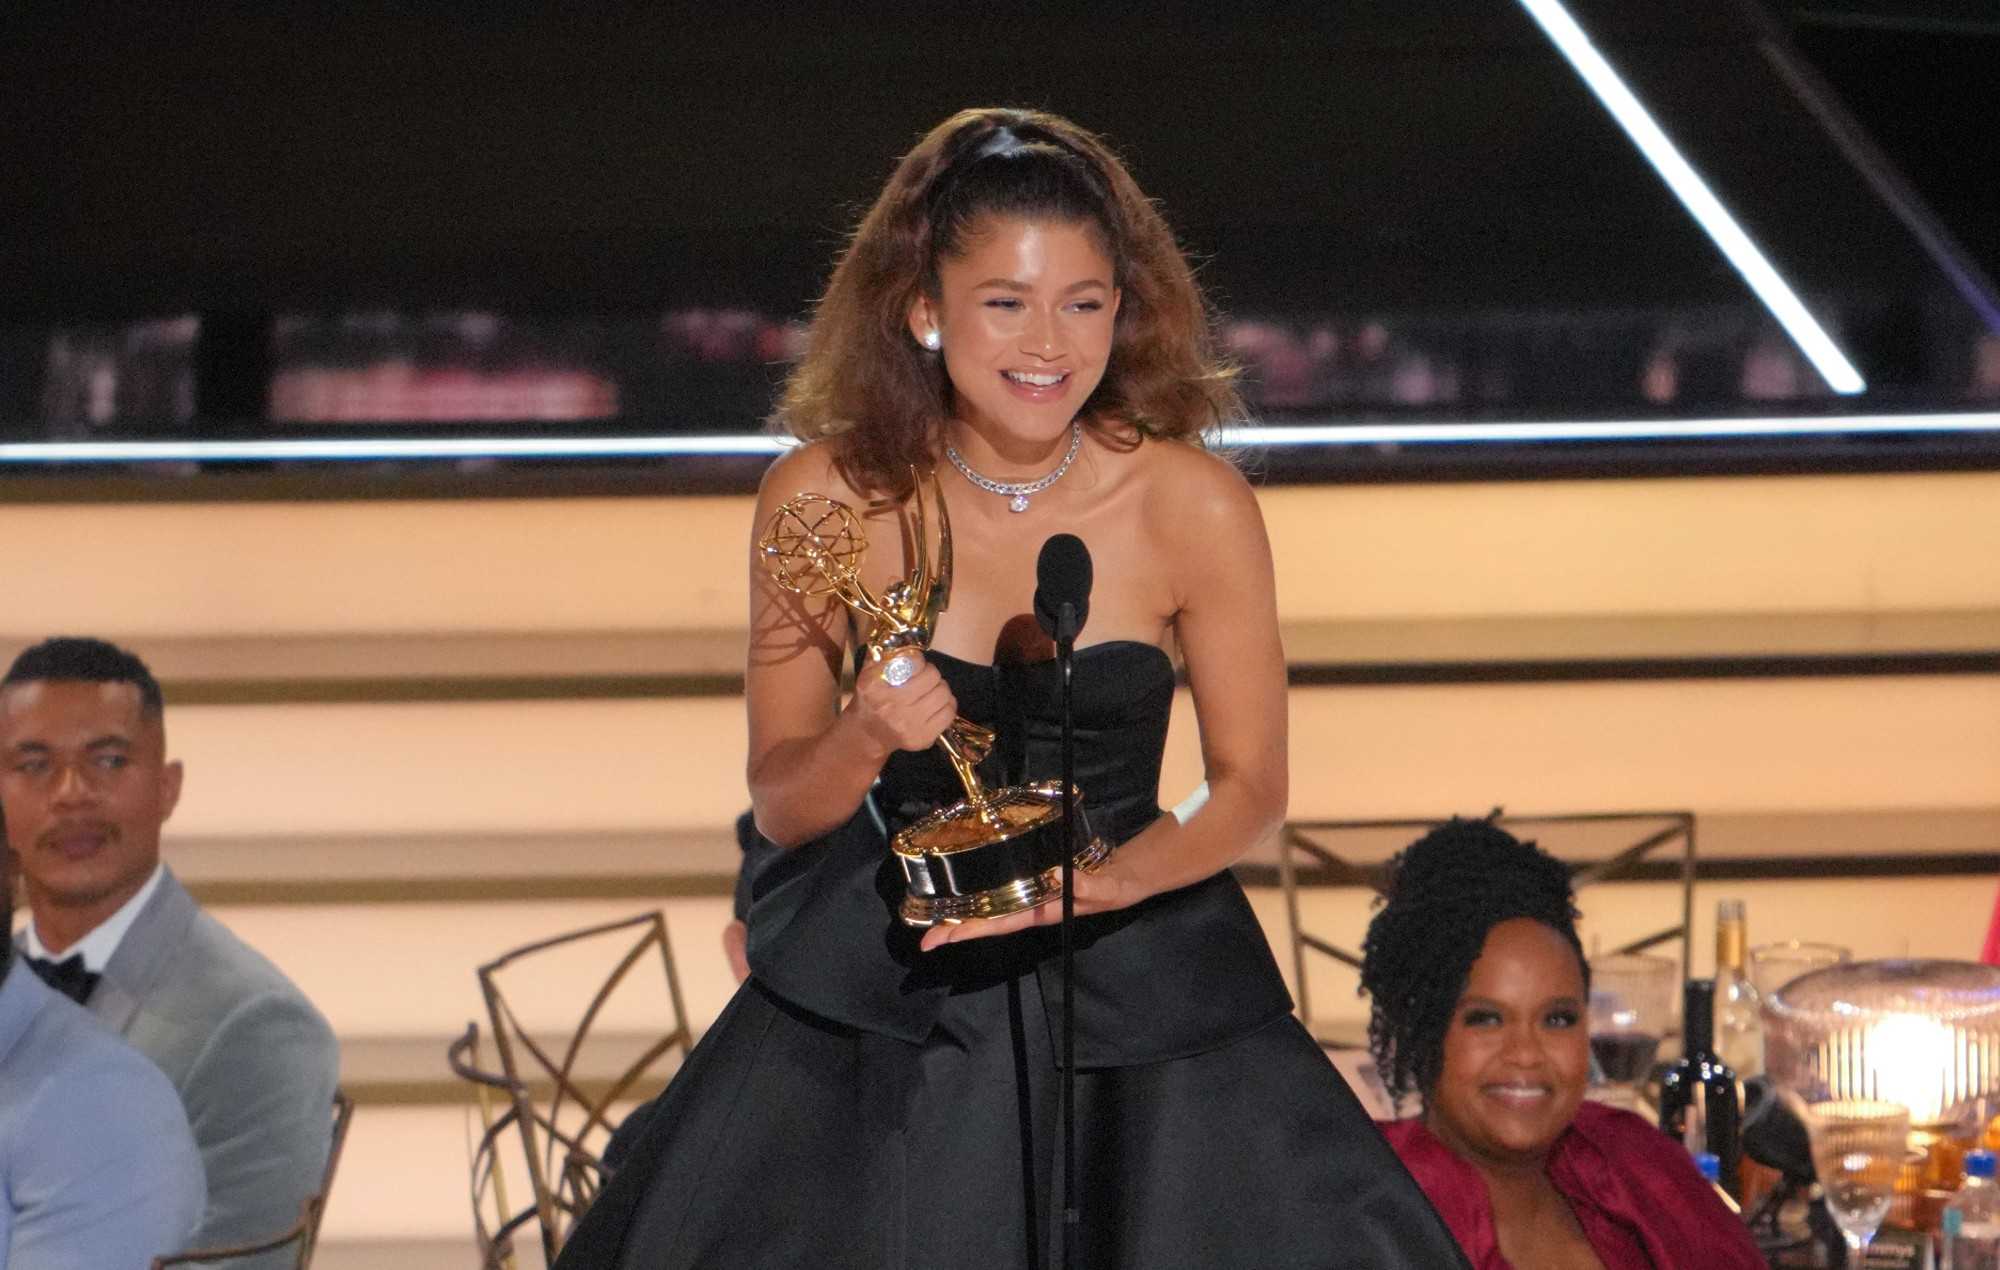 Zendaya shattered Emmy records being youngest and first Black woman to win twice